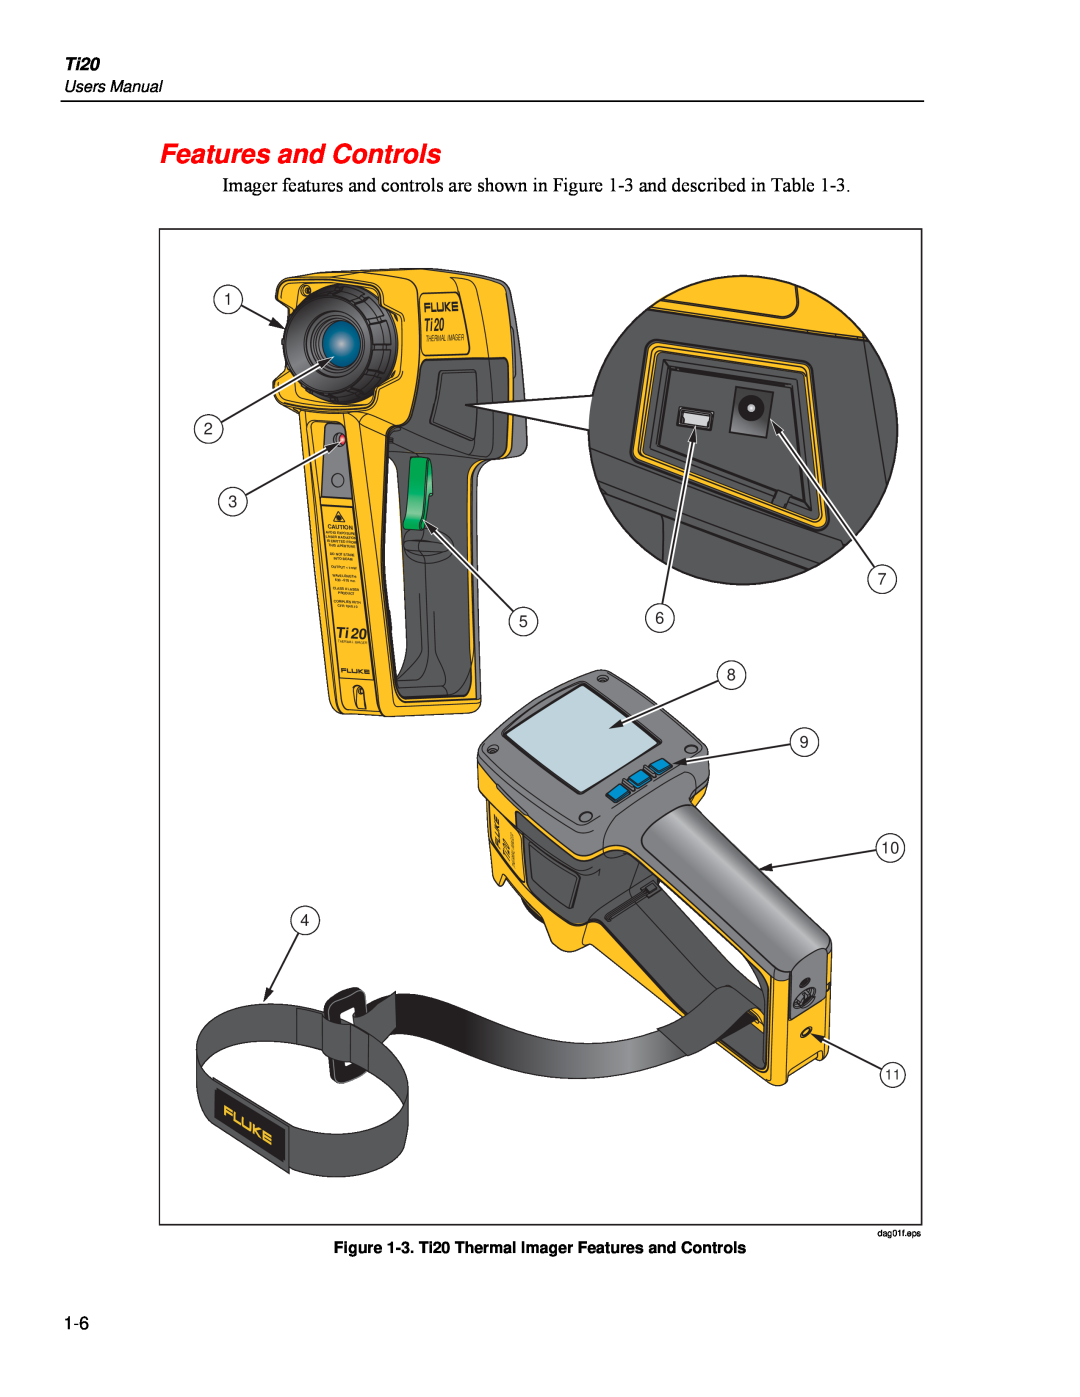 Fluke Ti20 user manual Features and Controls 